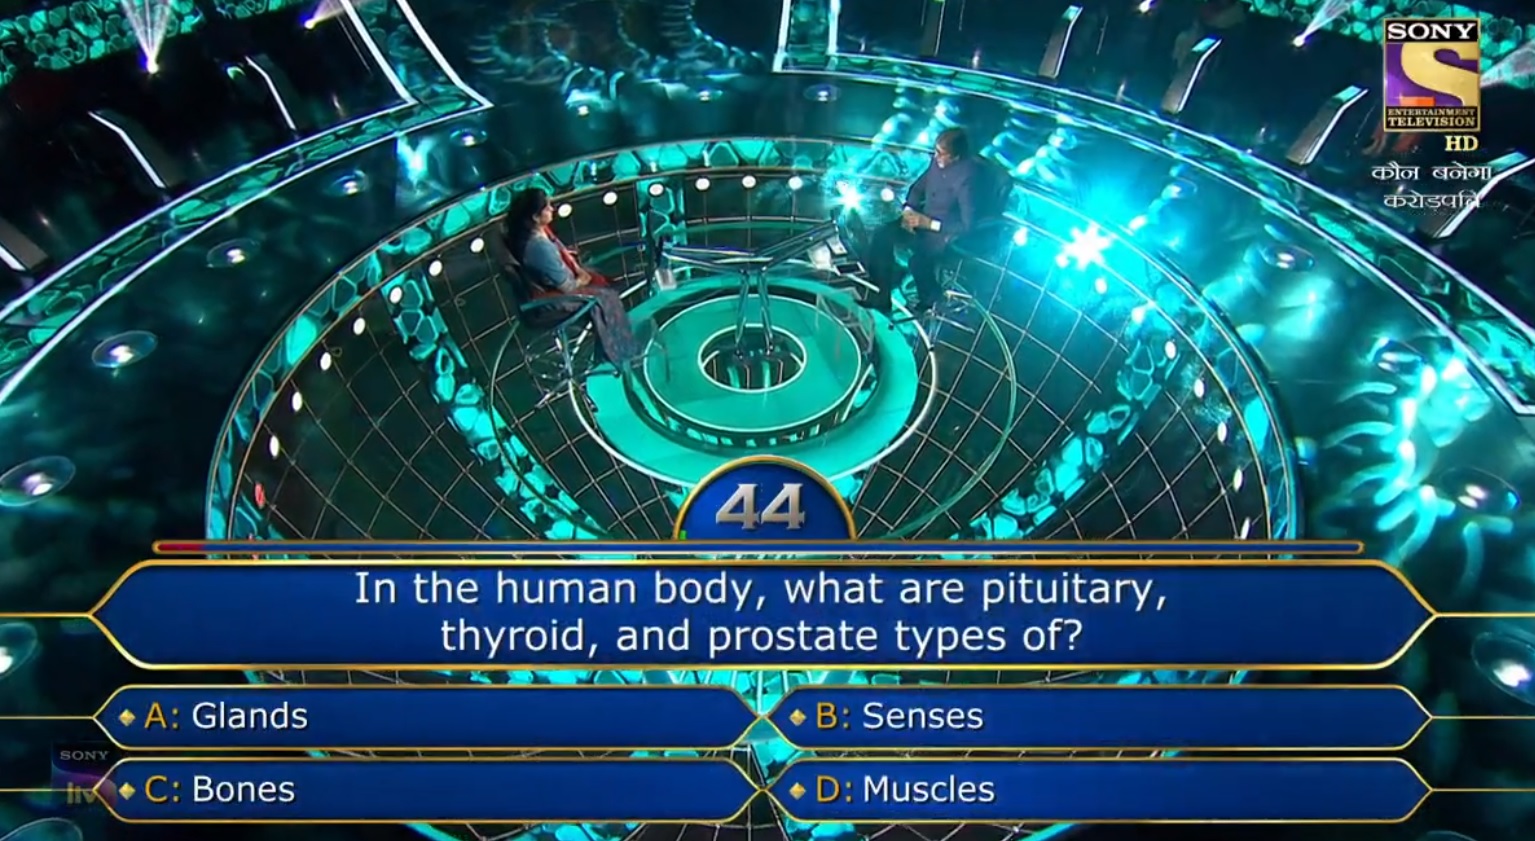 Ques : In the human body, what are pituitary,  thyroid,  and prostate types of?